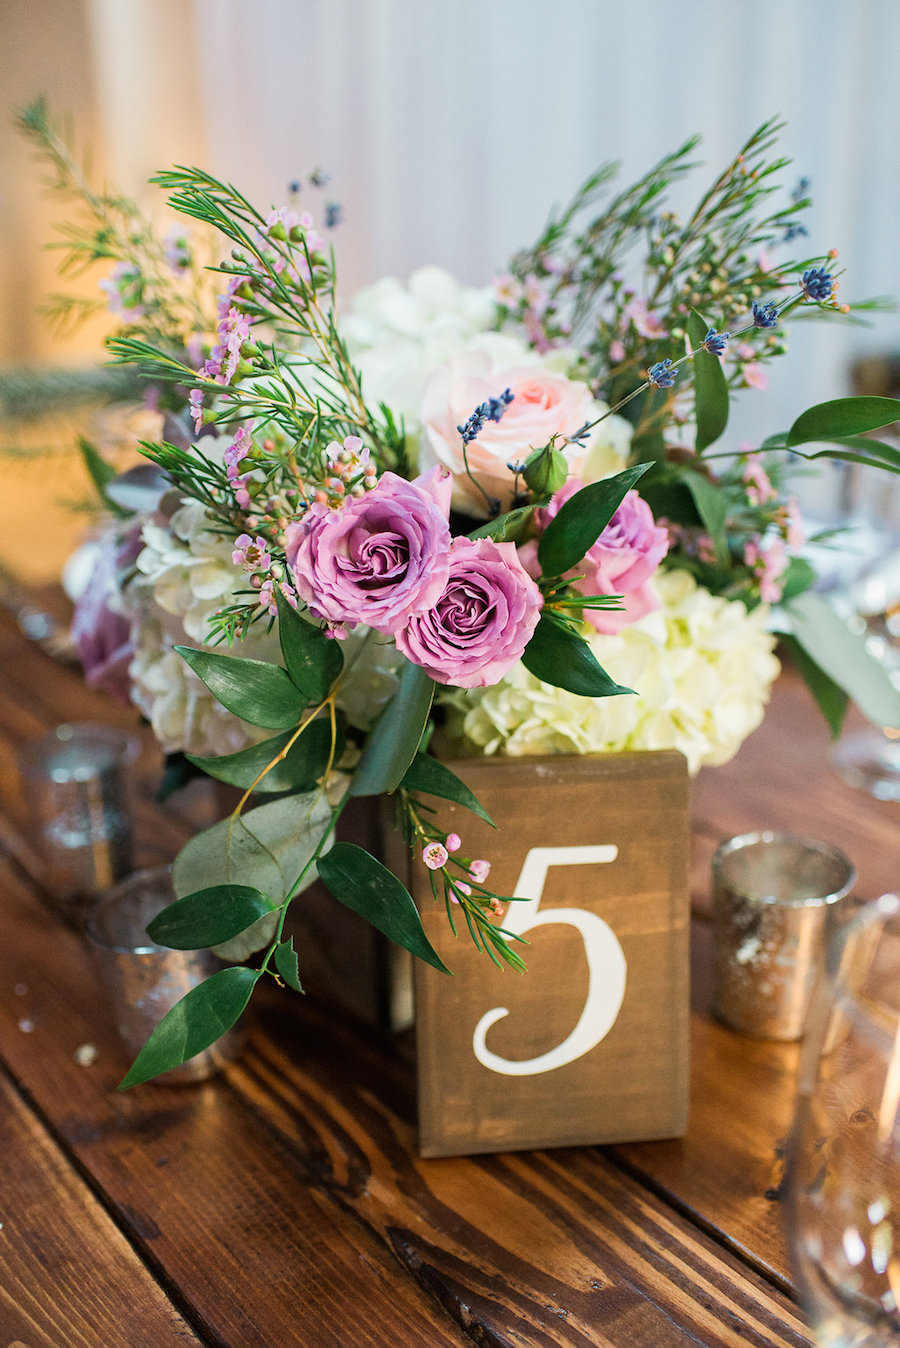 Rustic Garden Wedding Reception Table Decor with Wooden Table Numbers and Purple and Ivory Floral Centerpieces | Tampa Wedding Florist Andrea Layne Floral Design